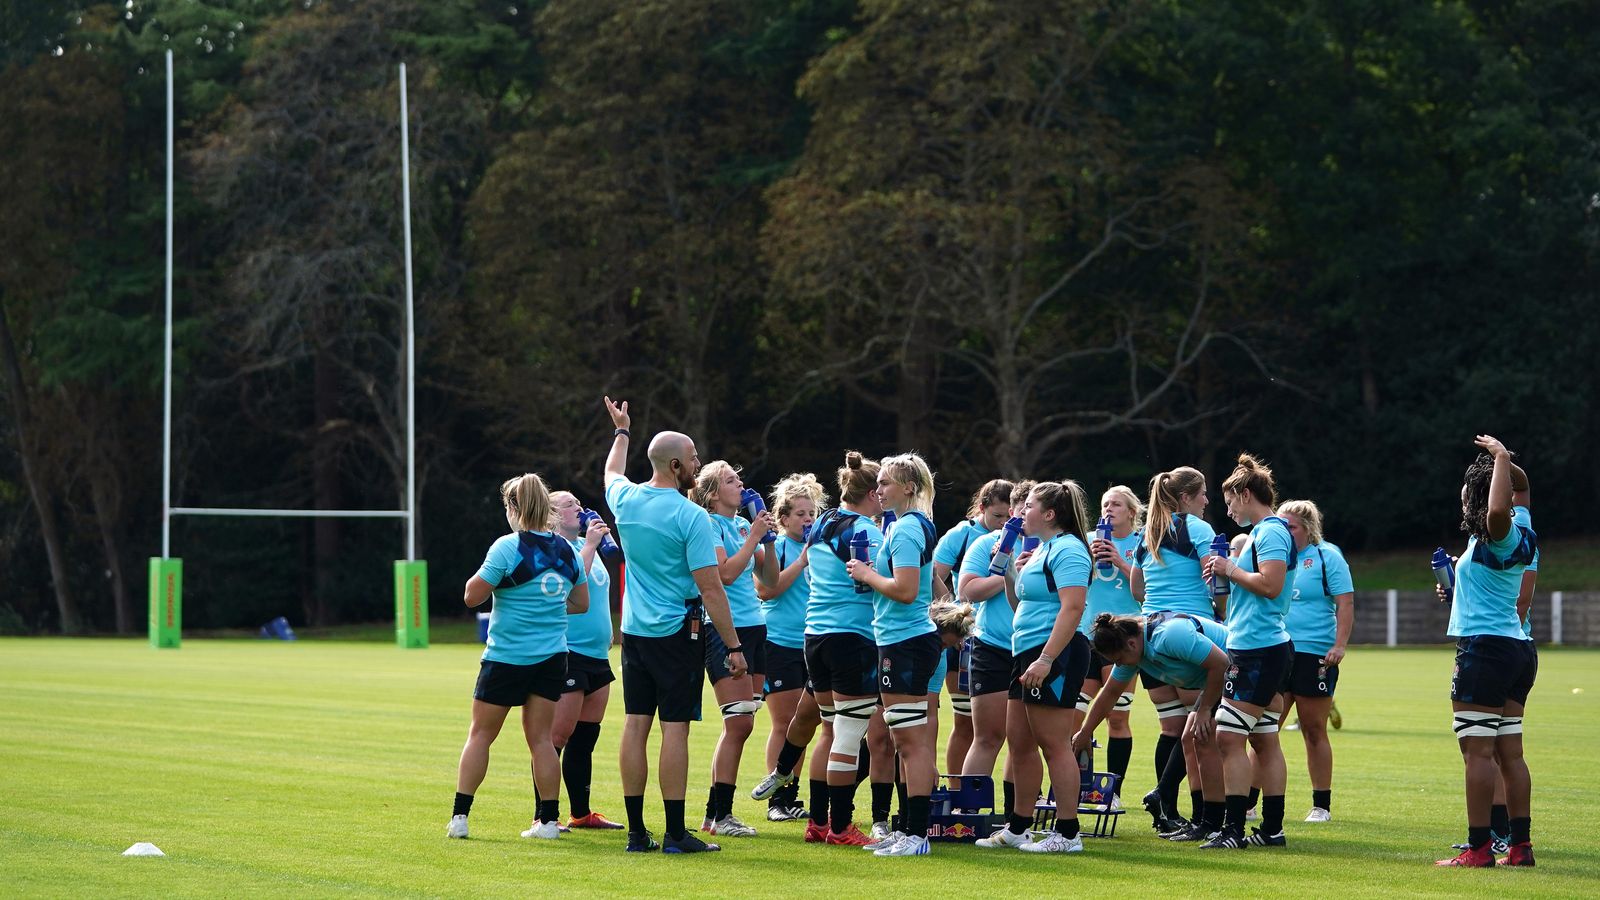 RFU defends decision to fly England women to New Zealand World Cup in economy after men’s squad flew to 2019 tournament in business class